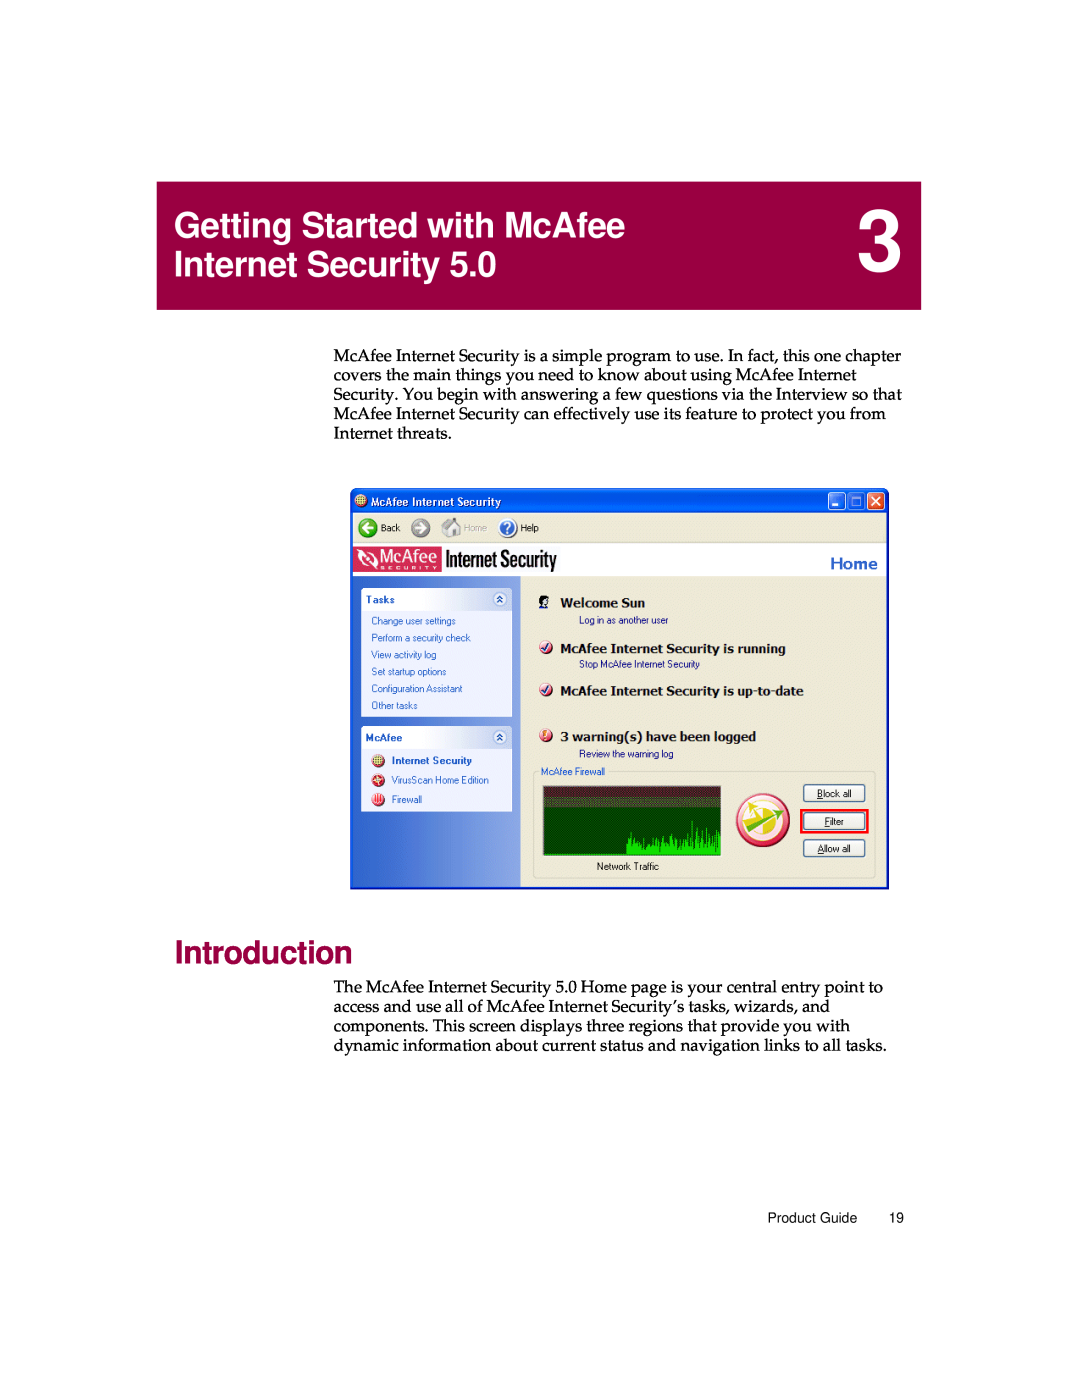 McAfee 5 manual Getting Started with McAfee, Internet Security, Introduction, Product Guide 